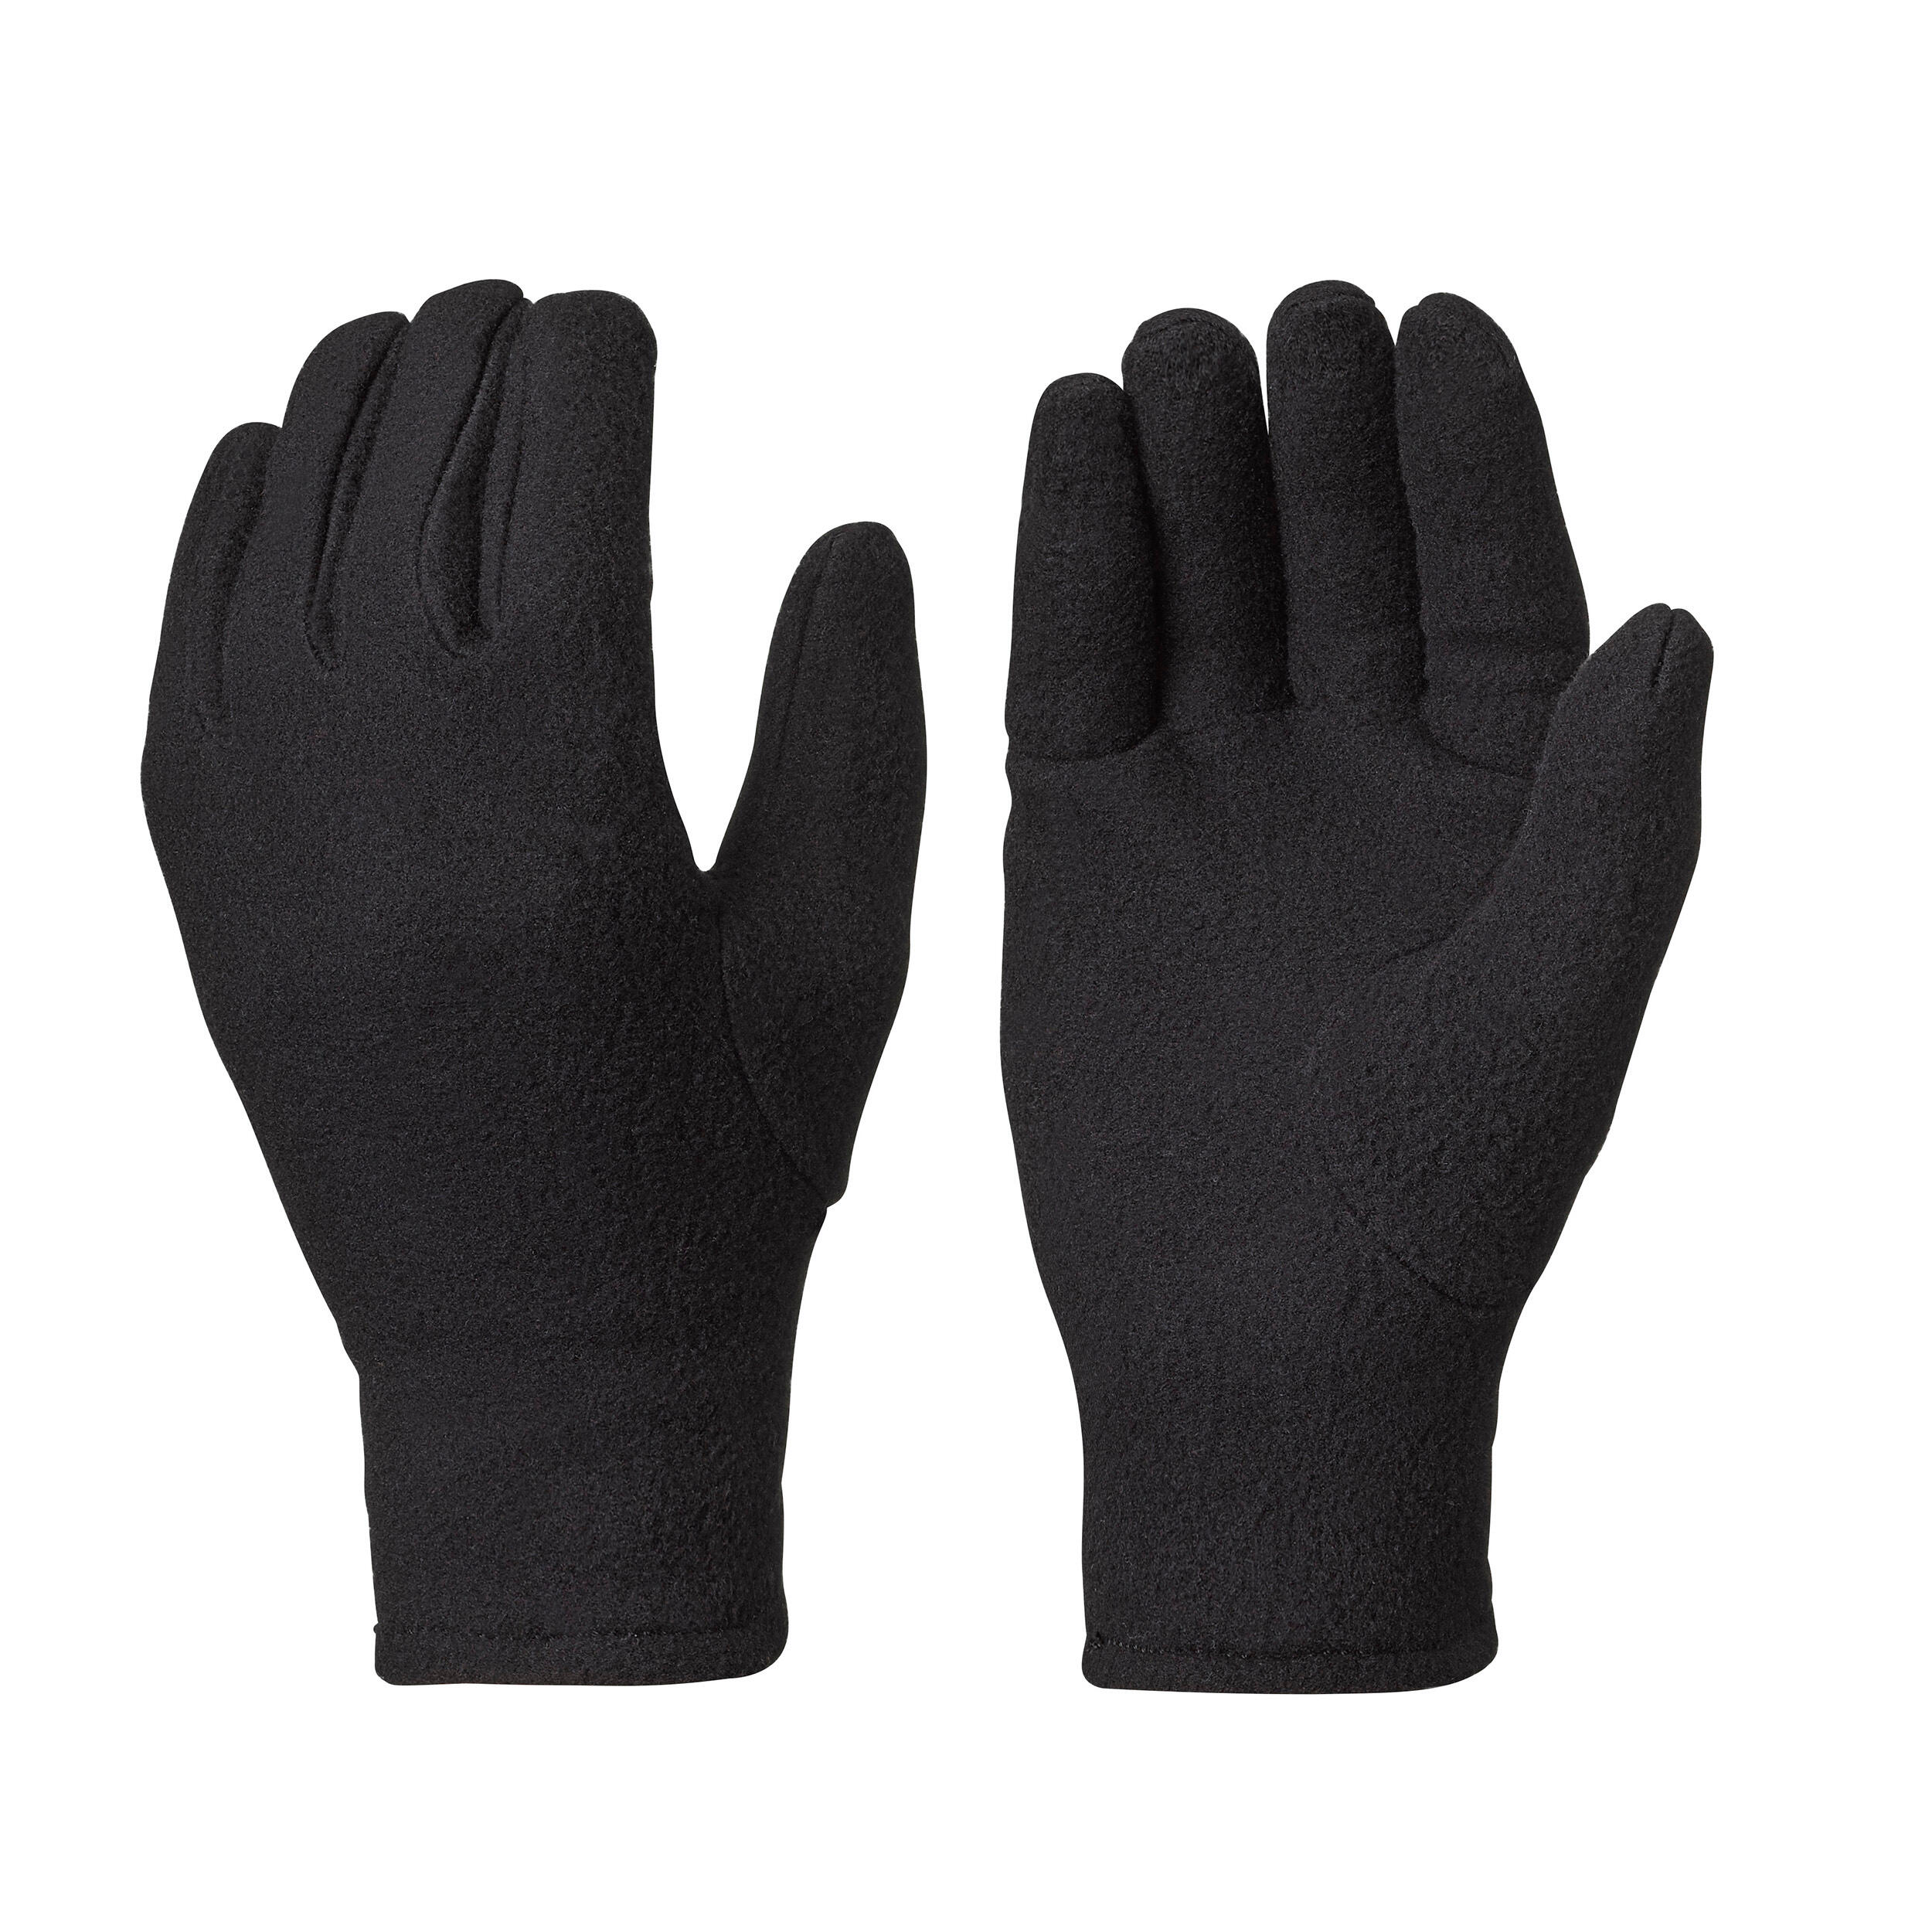 Highlander Homme Mitaines Gants Thinsulate Doublure Thermique Noir Small 